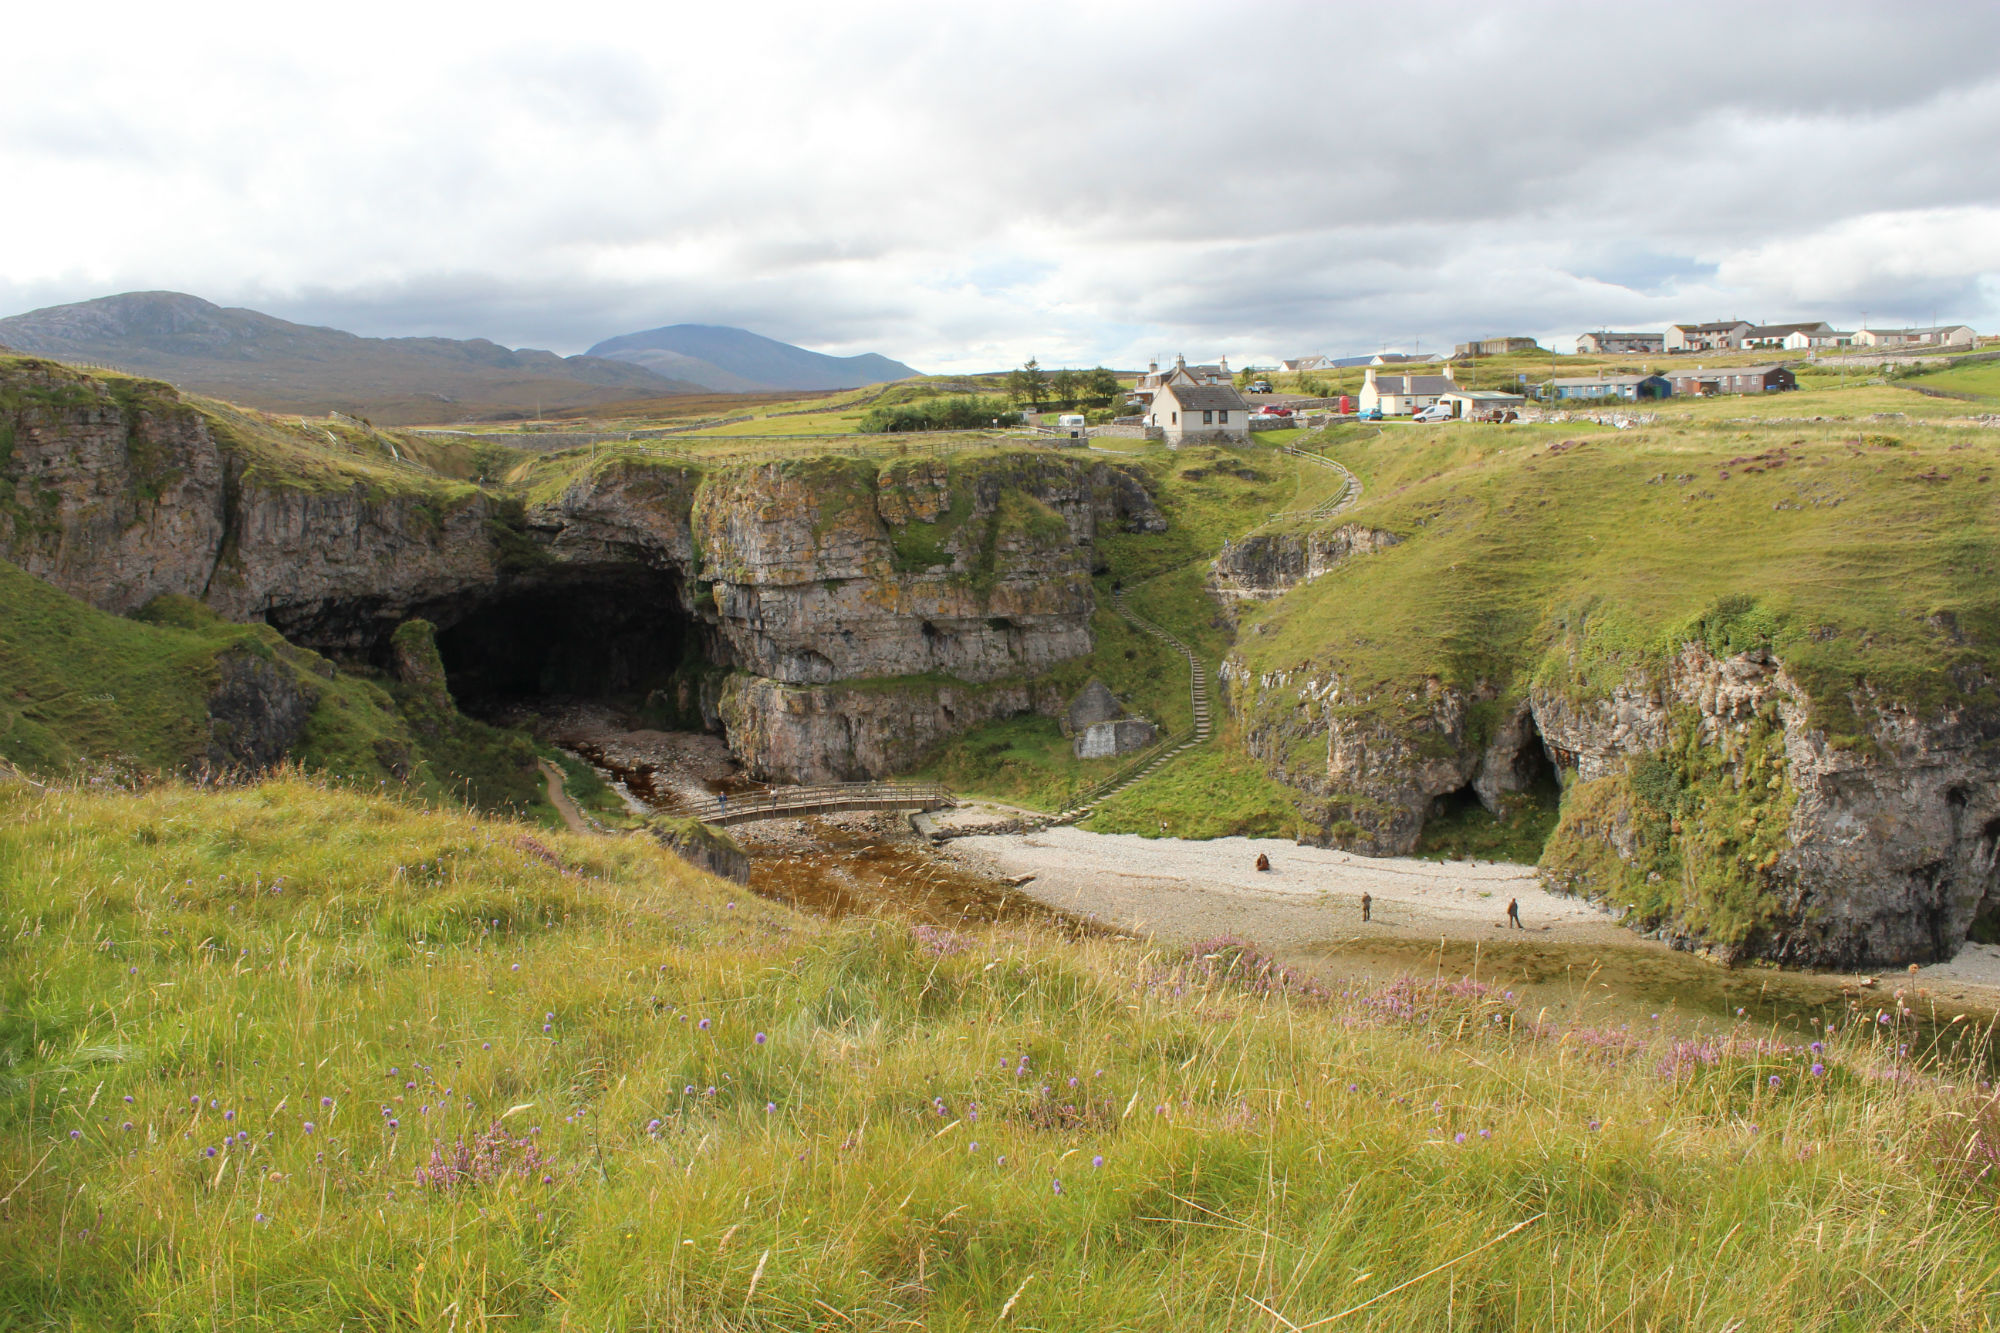 General view looking southwest towards Smoo Cave, Glass Knappers Cave on right of image